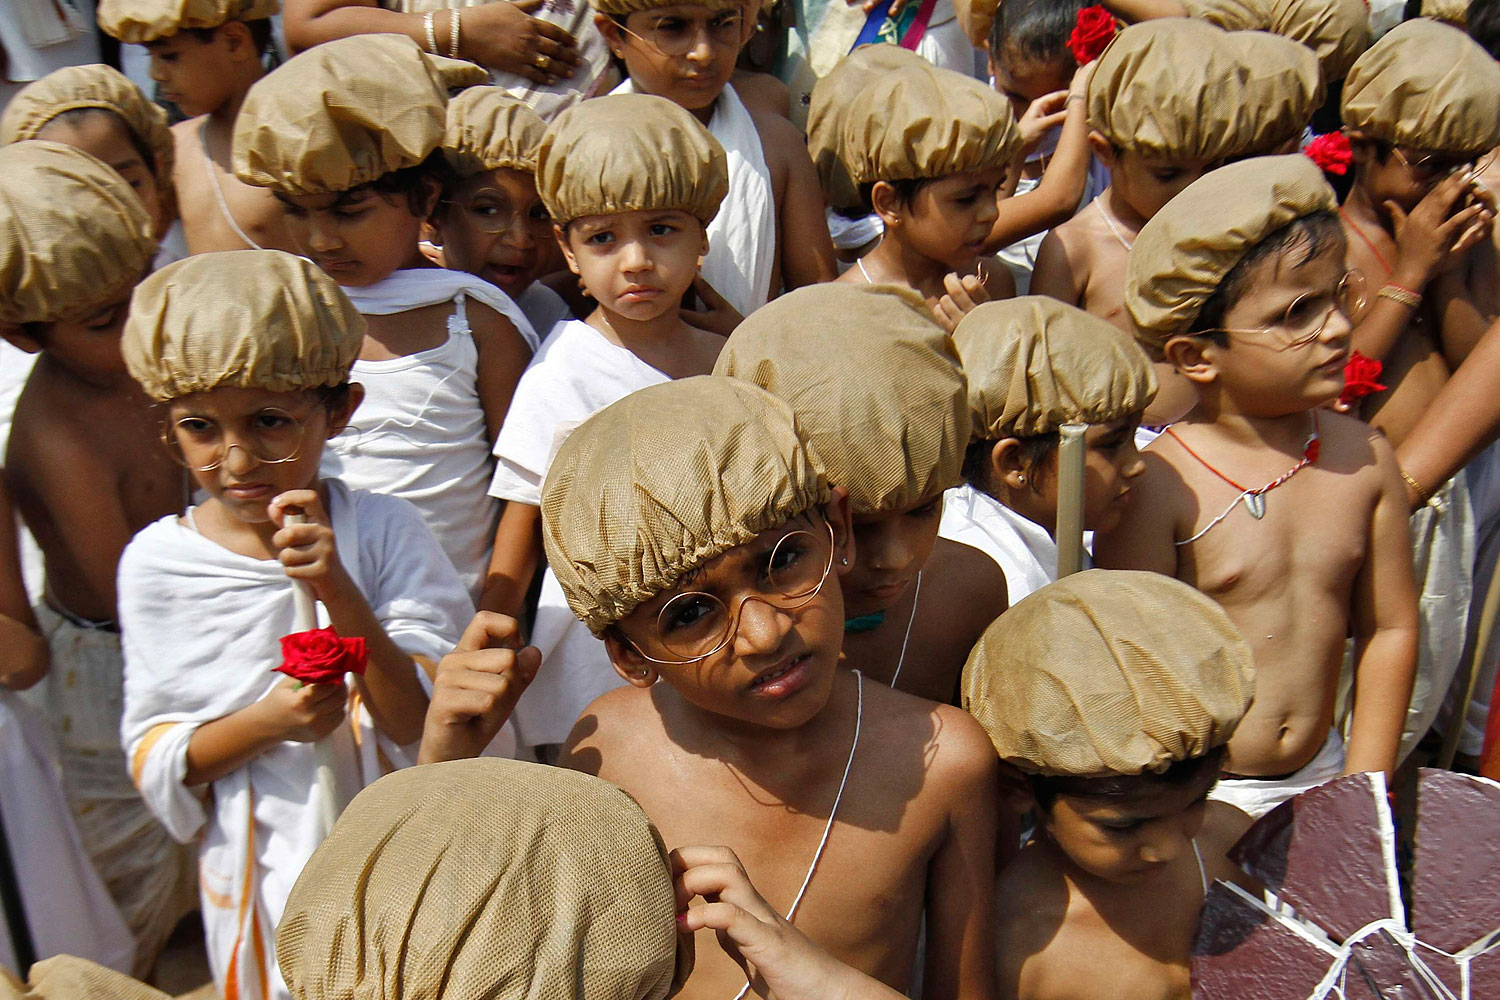 School children dressed as Mahatma Gandhi participate in celebrations marking the 144th birth anniversary of Gandhi, in the southern Indian city of Chennai